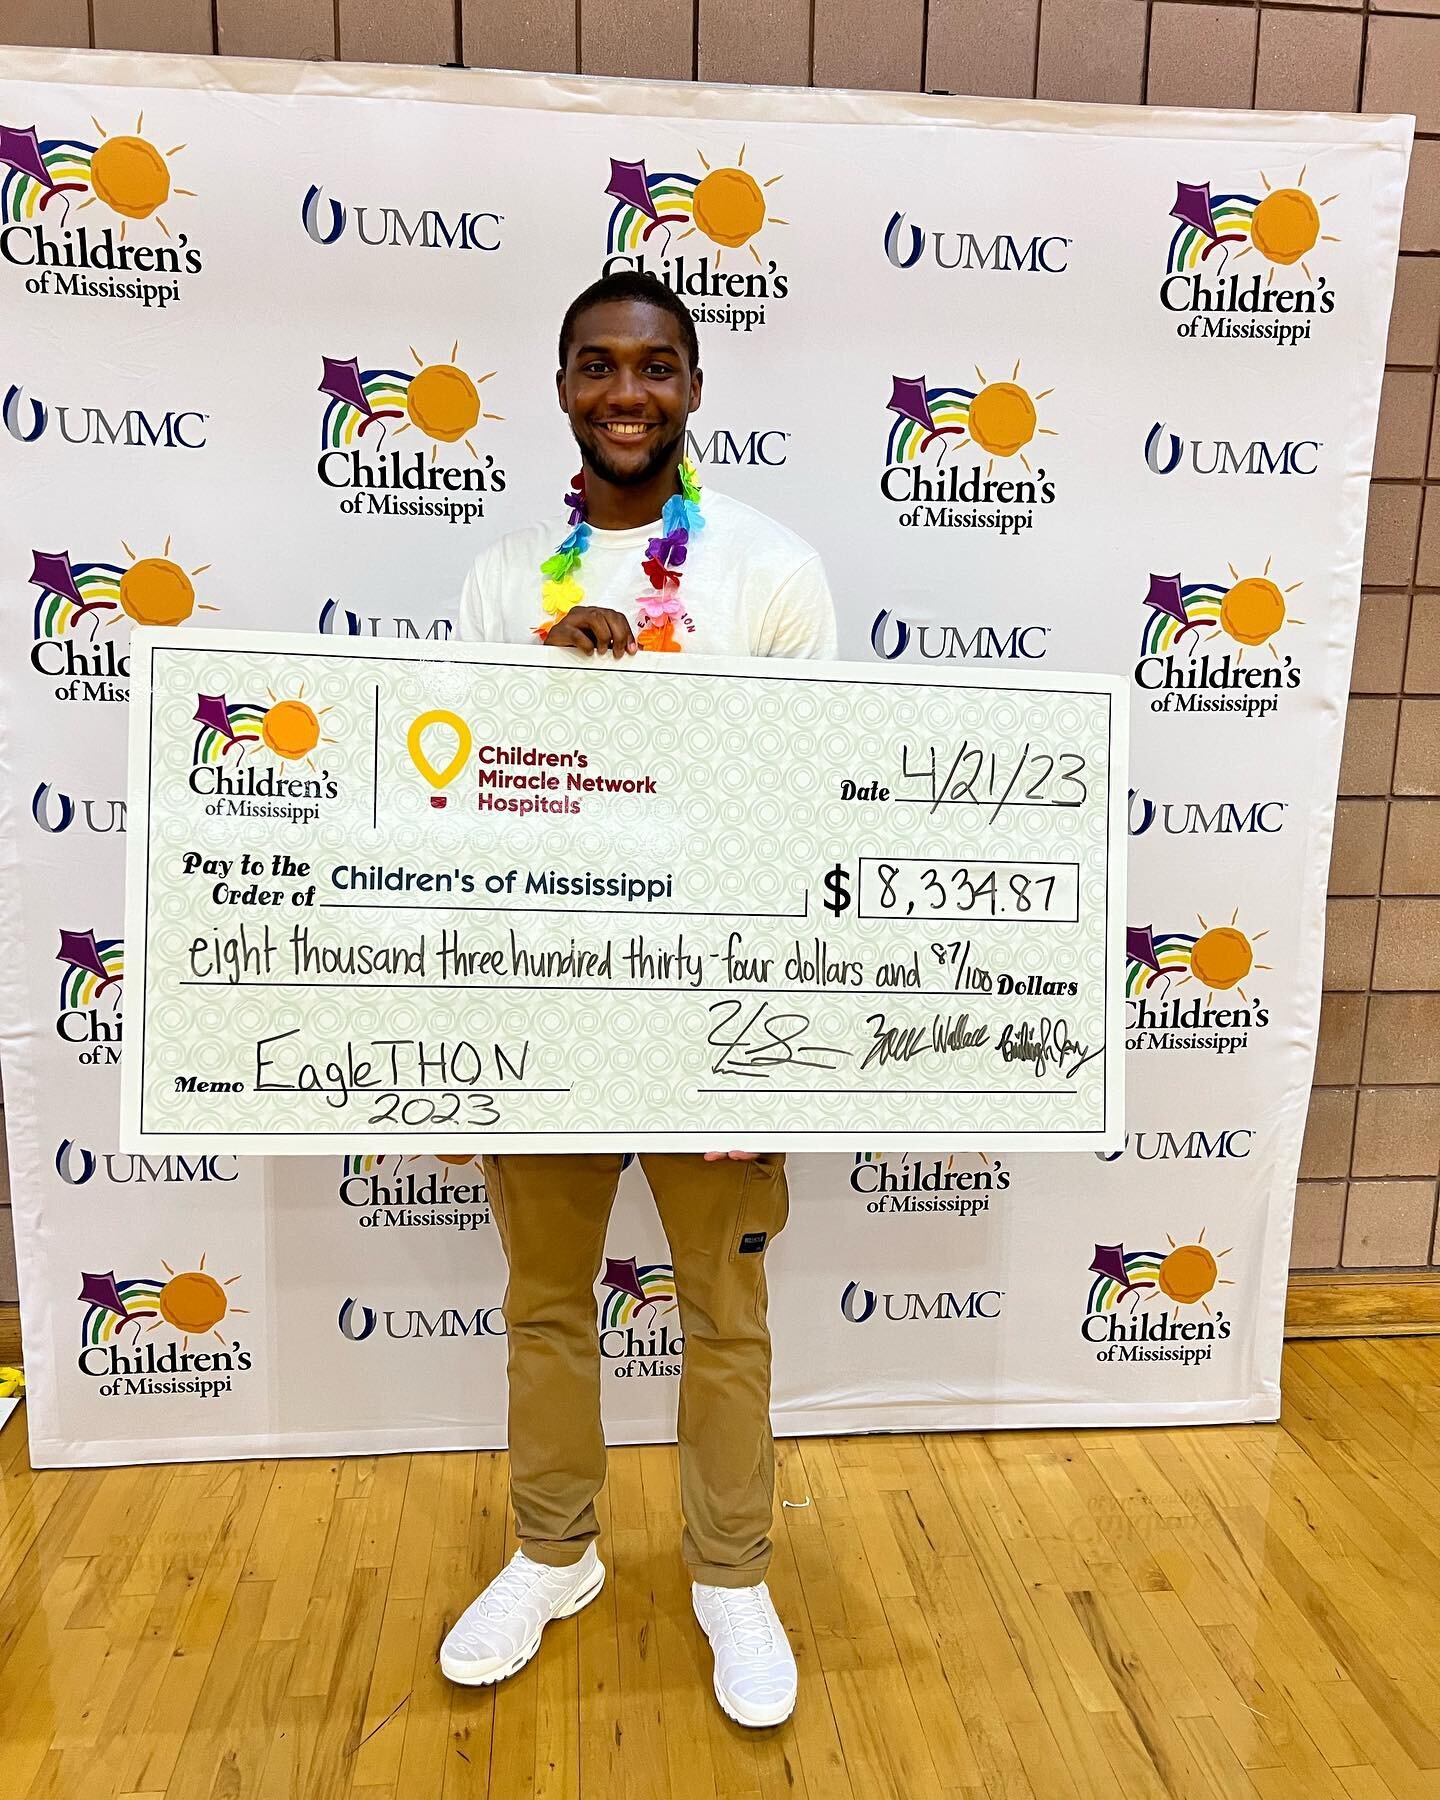 Let&rsquo;s just take a moment to look back on the week that has been for @clemonslab undergraduate student @zwallace25 ! I don&rsquo;t think I have ever seen one week jammed with so much achievement!
1. Raising $8334.87 for the Children&rsquo;s Hosp